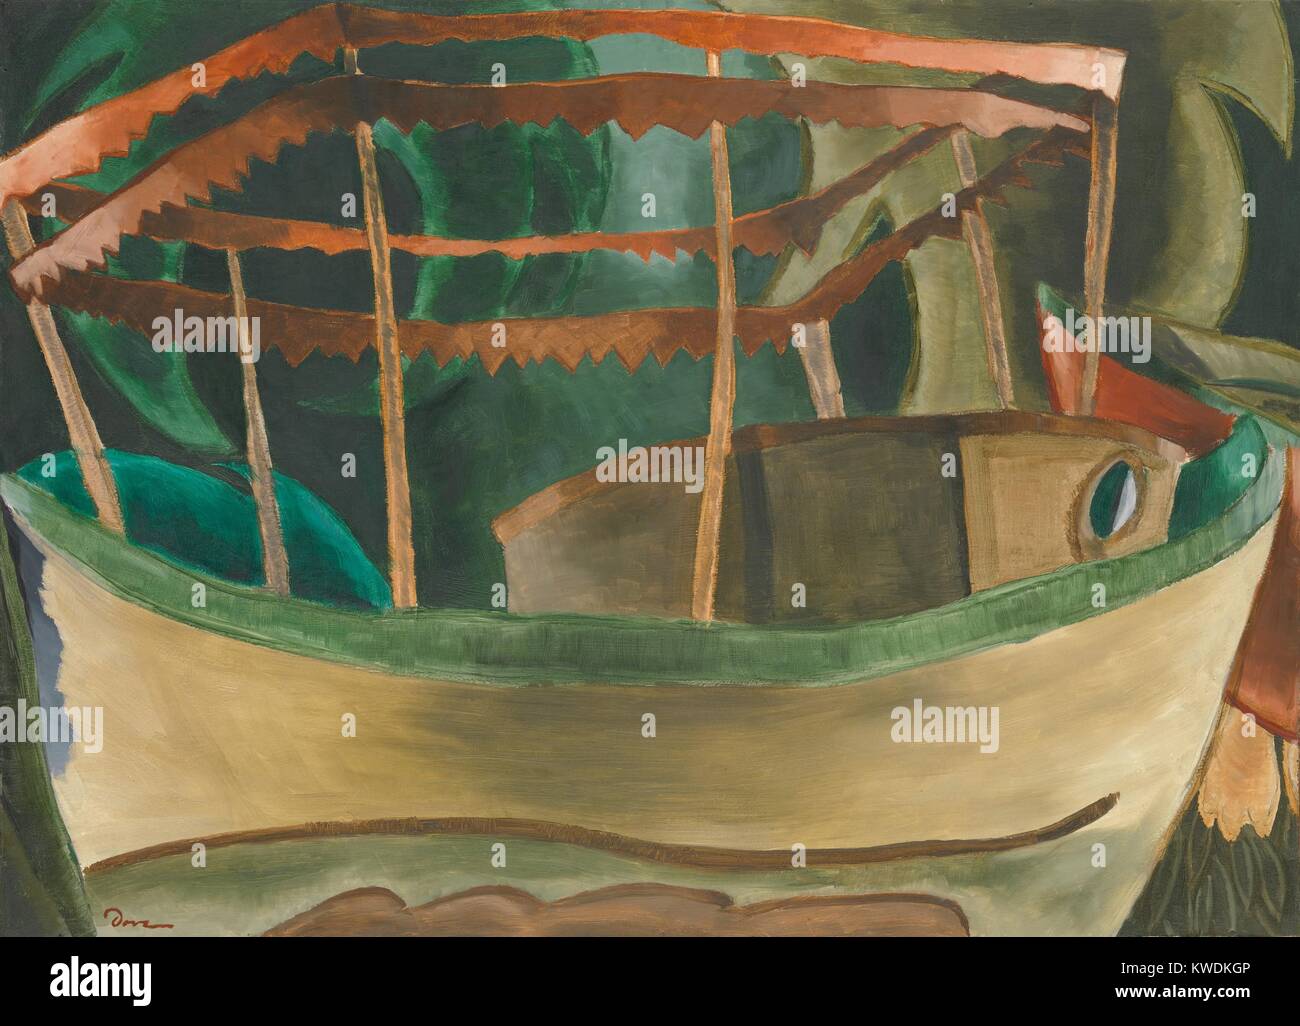 FISHBOAT, by Arthur Dove, 1930, American painting, oil on paperboard. Abstracted boat fills the artwork surface, with a background of modeled green shapes (BSLOC 2017 7 85) Stock Photo